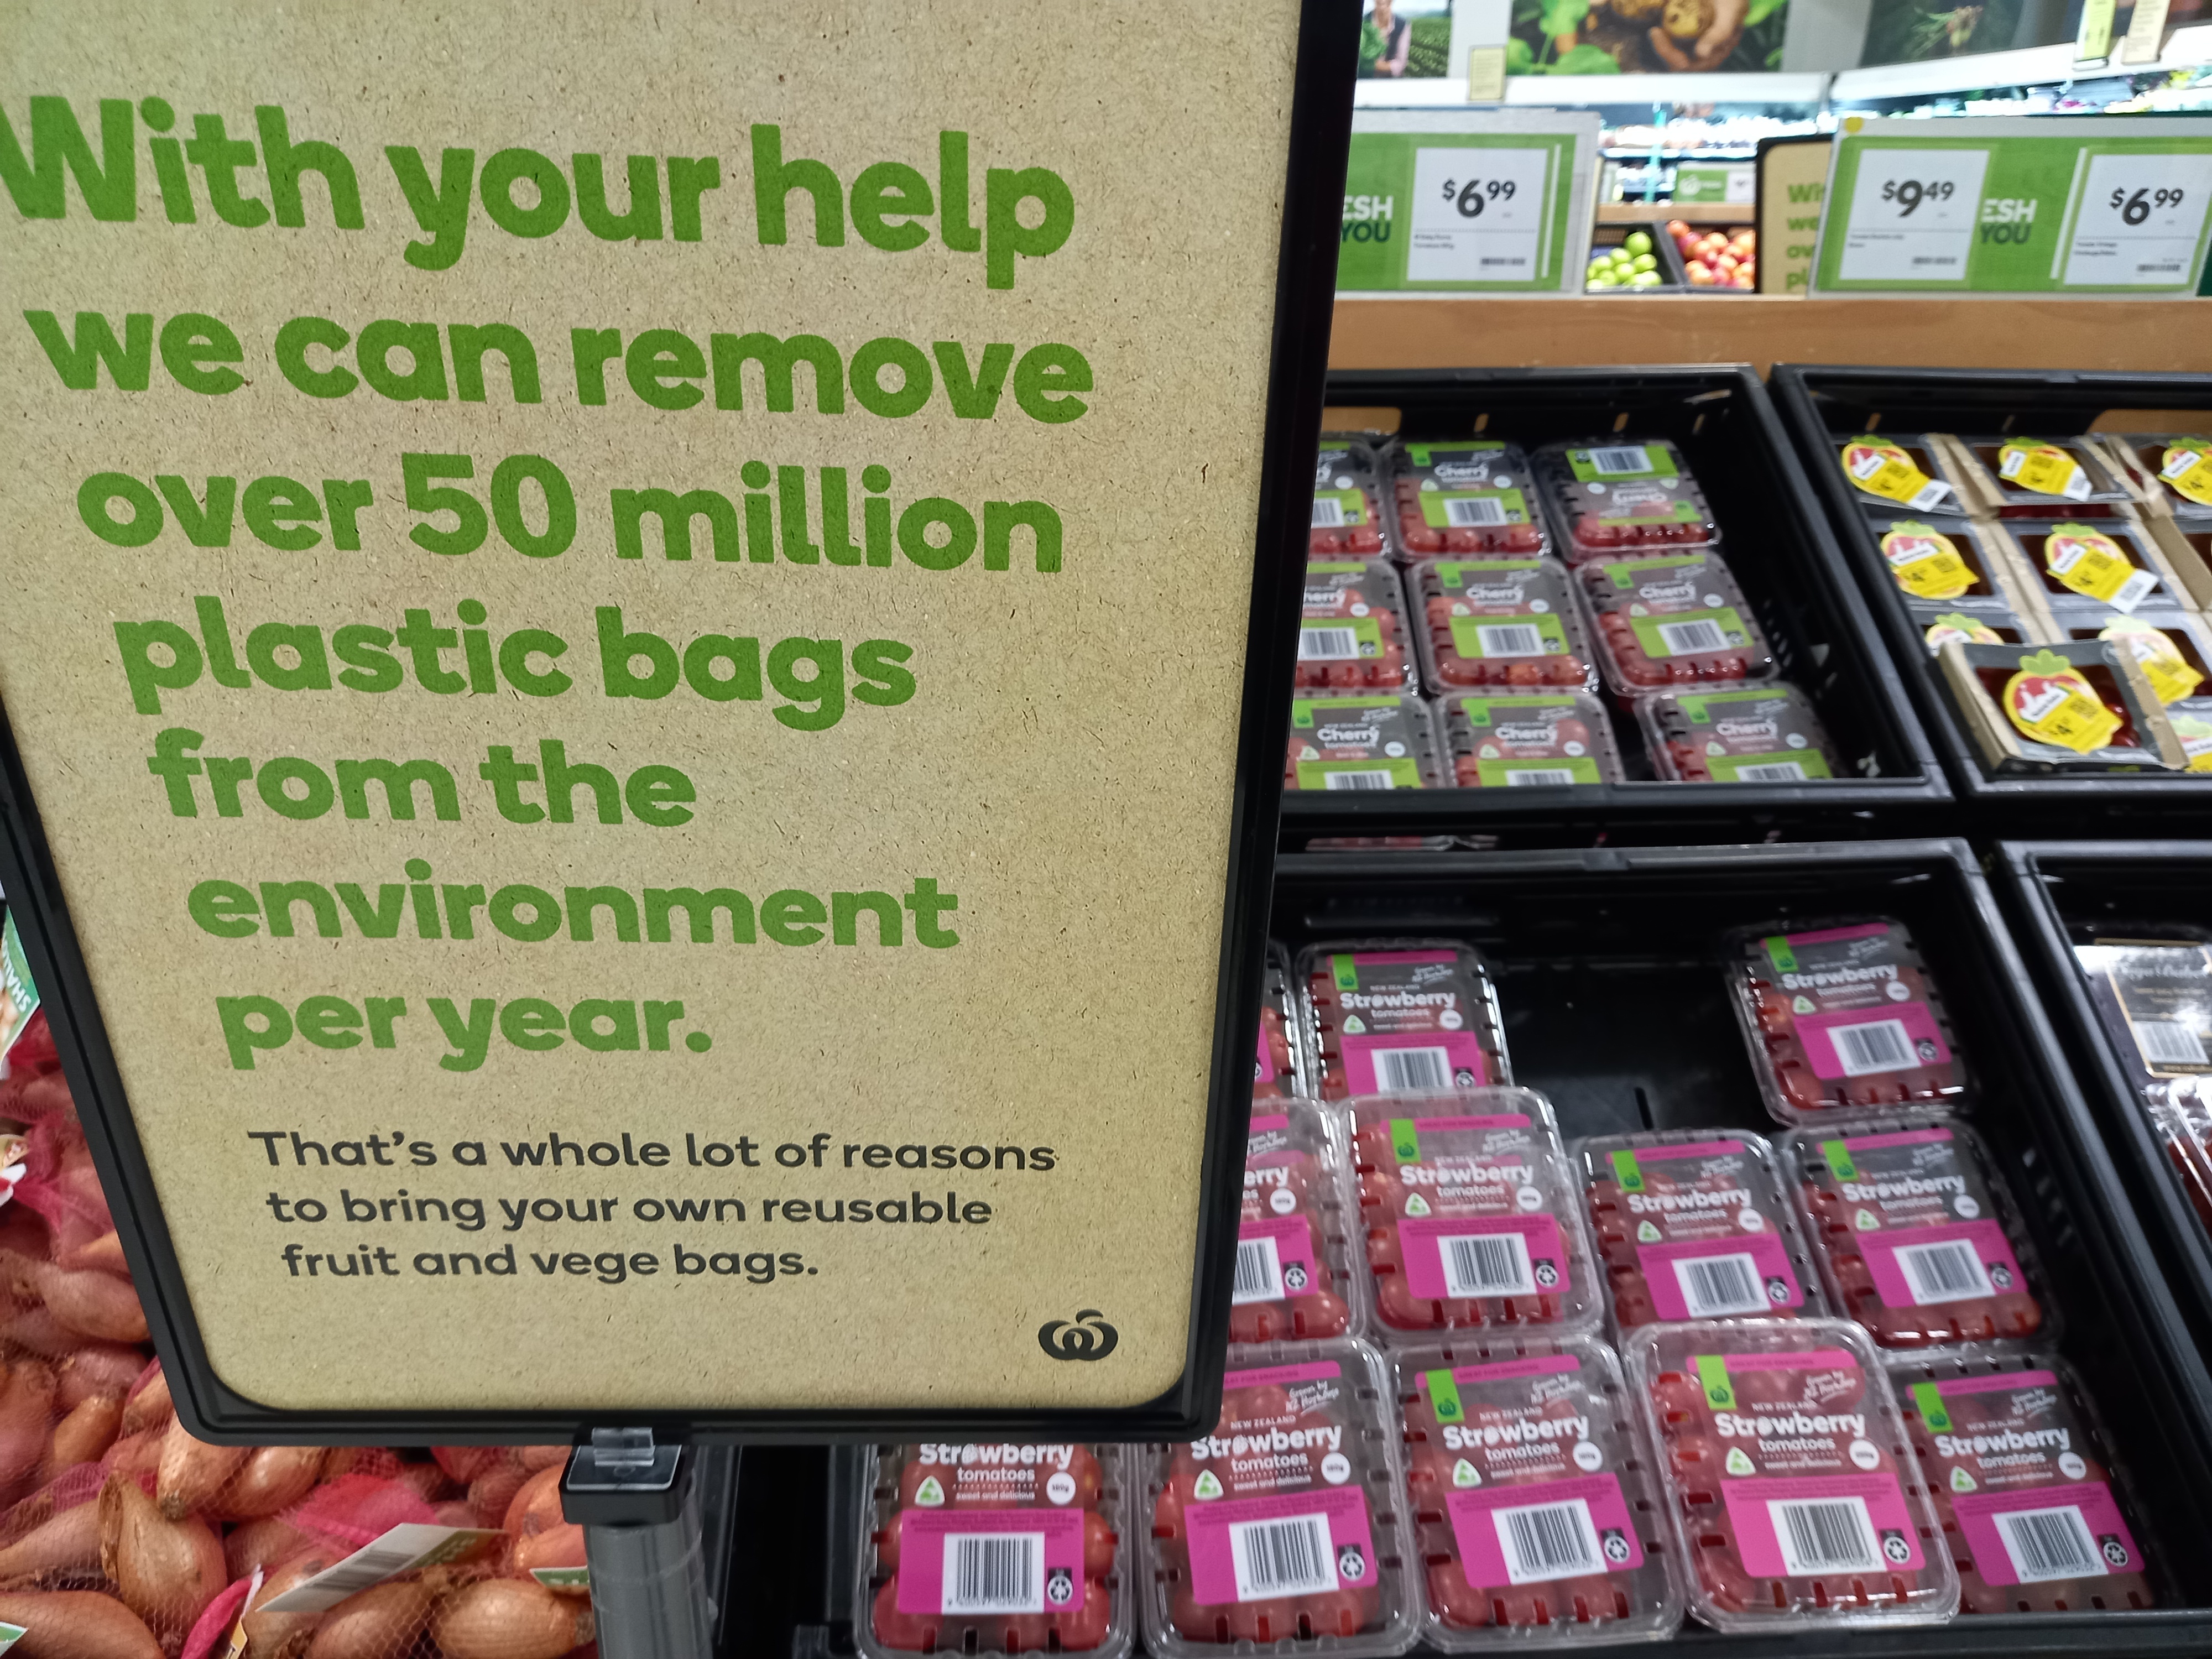 Image: a Coyntdown sign next to a bin of Countdown branded tomatoes in plastic punnets. The sign says "With your help we can remove over 50 million platic bags from the environment each year. Thats a whole lot fo reasons to bring your own reusable fruit and vege bags."